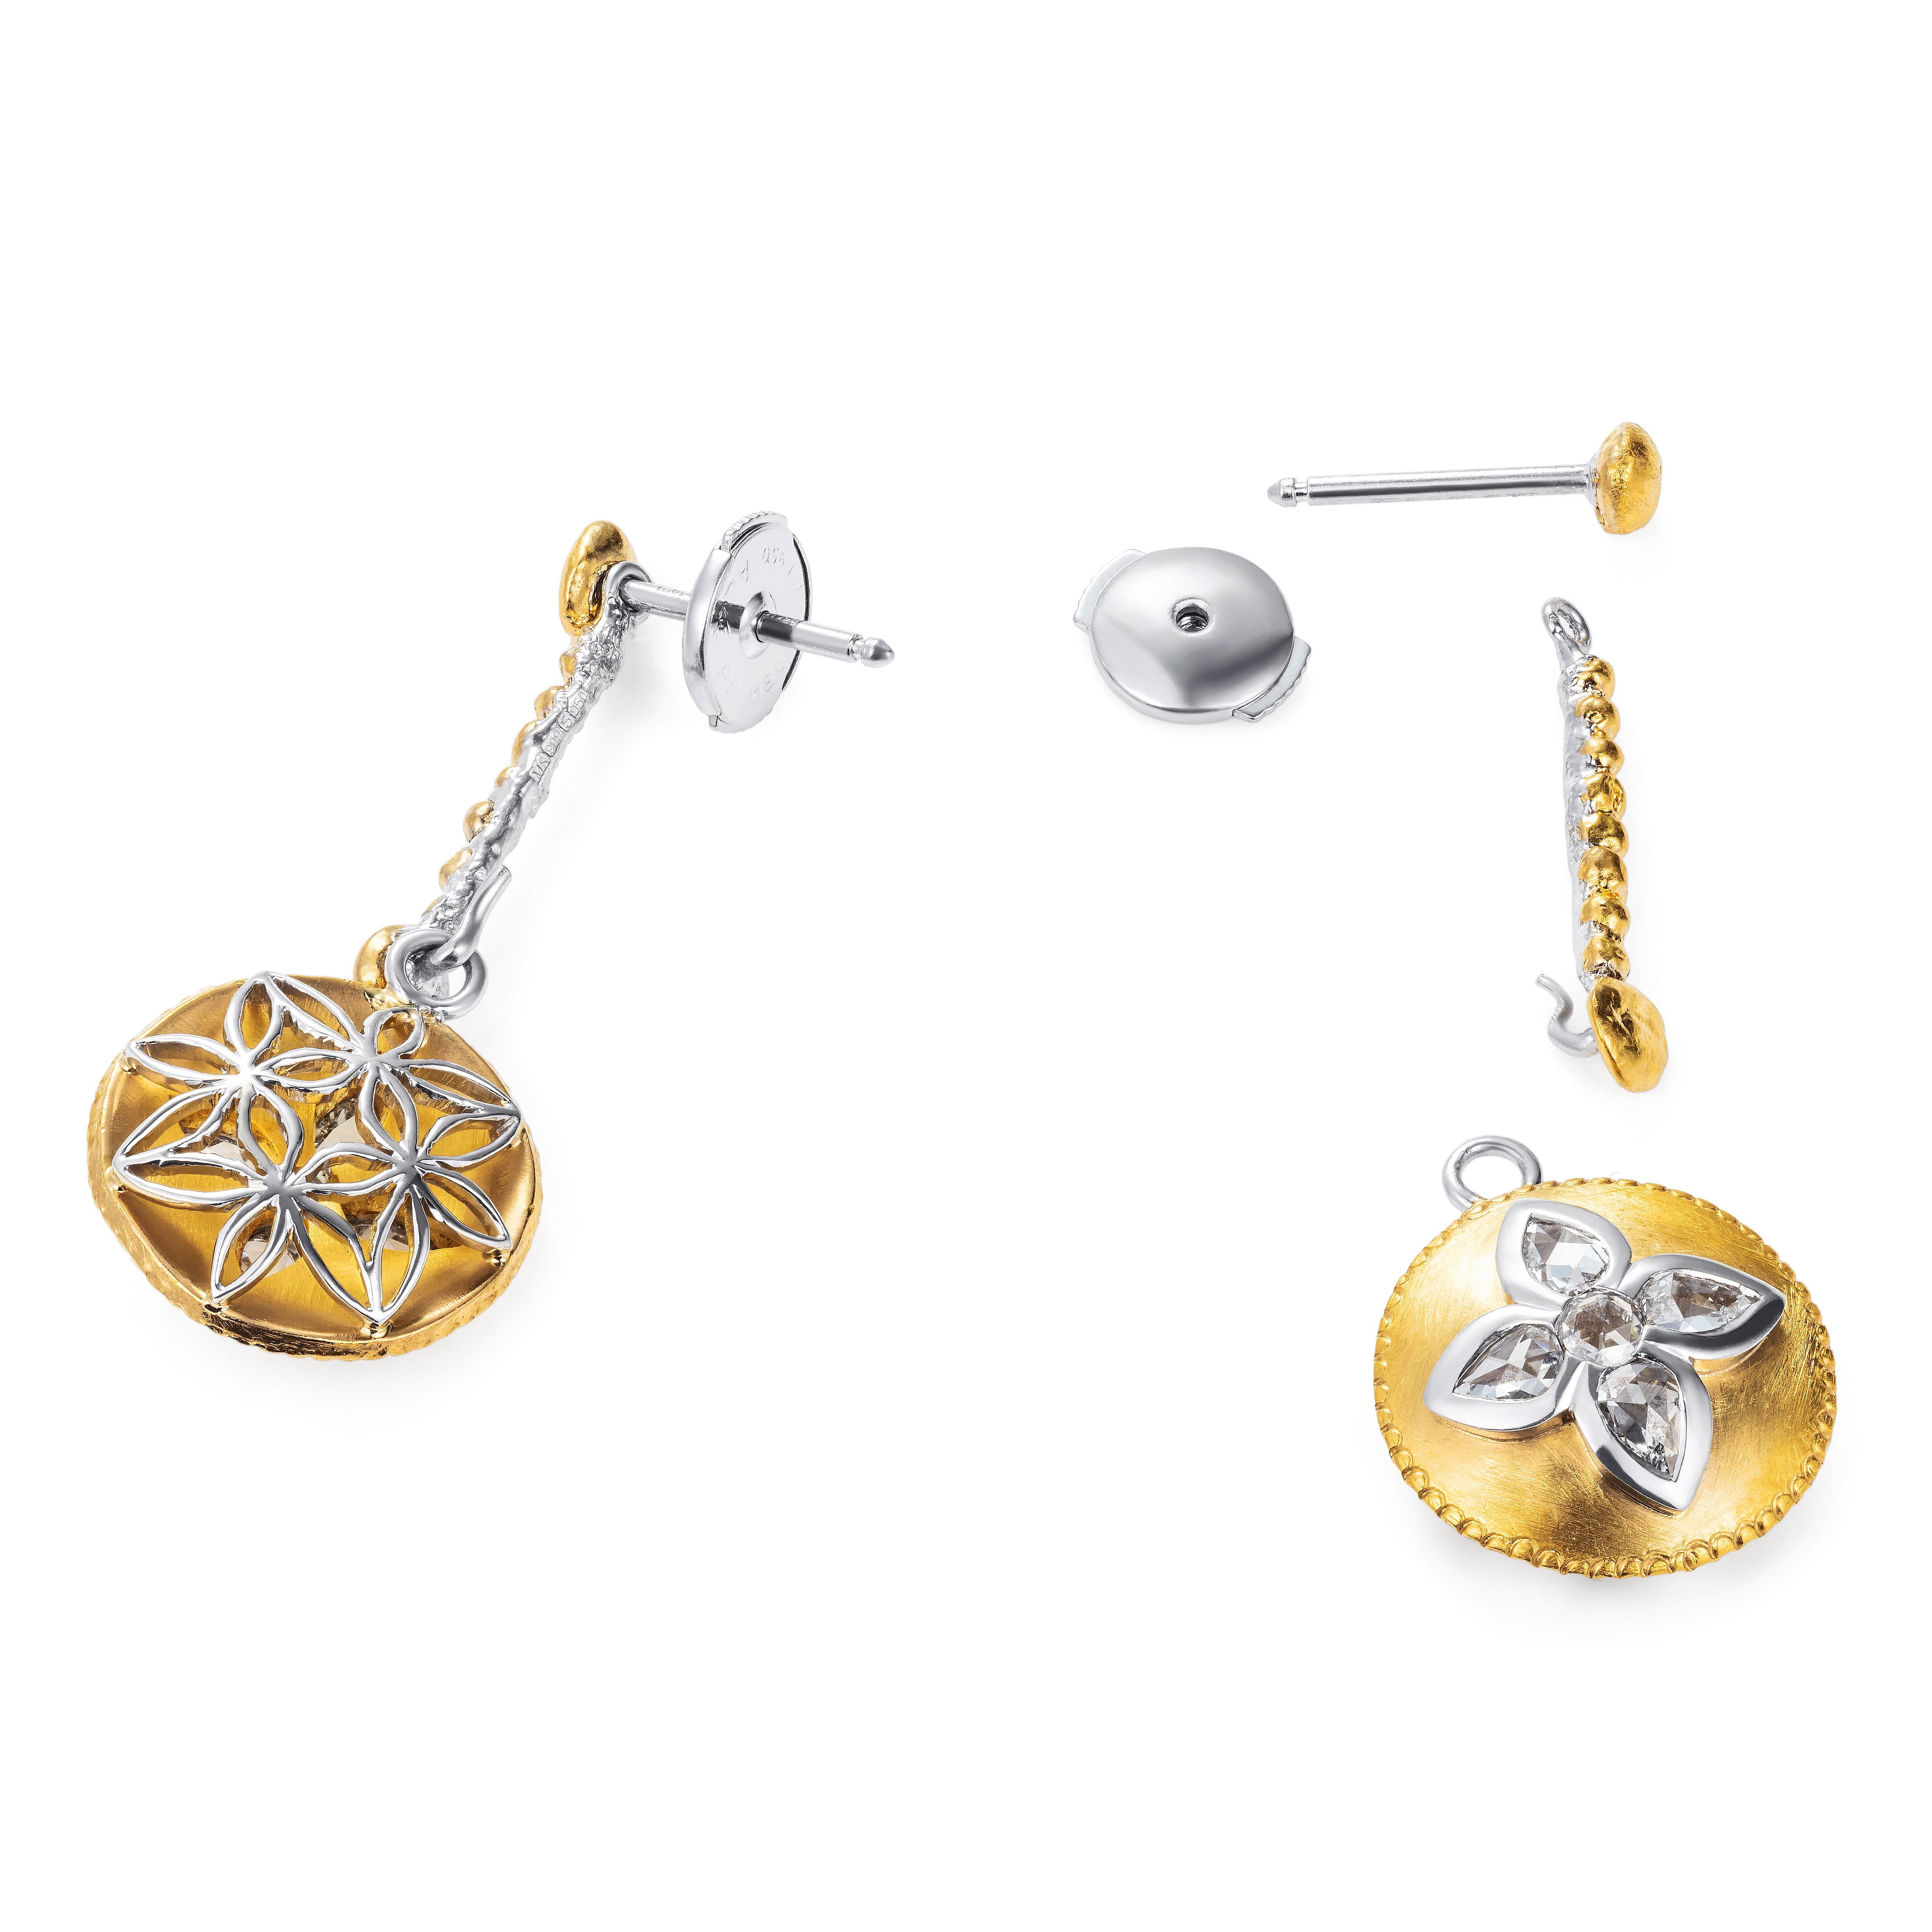 Part of our L'or collection, these earrings are handmade in platinum and 24 karat gold giving a lush and luxurious feel and making them irresistible to both touch and sight.  This collection is inspired by antiquity and presented in a modern